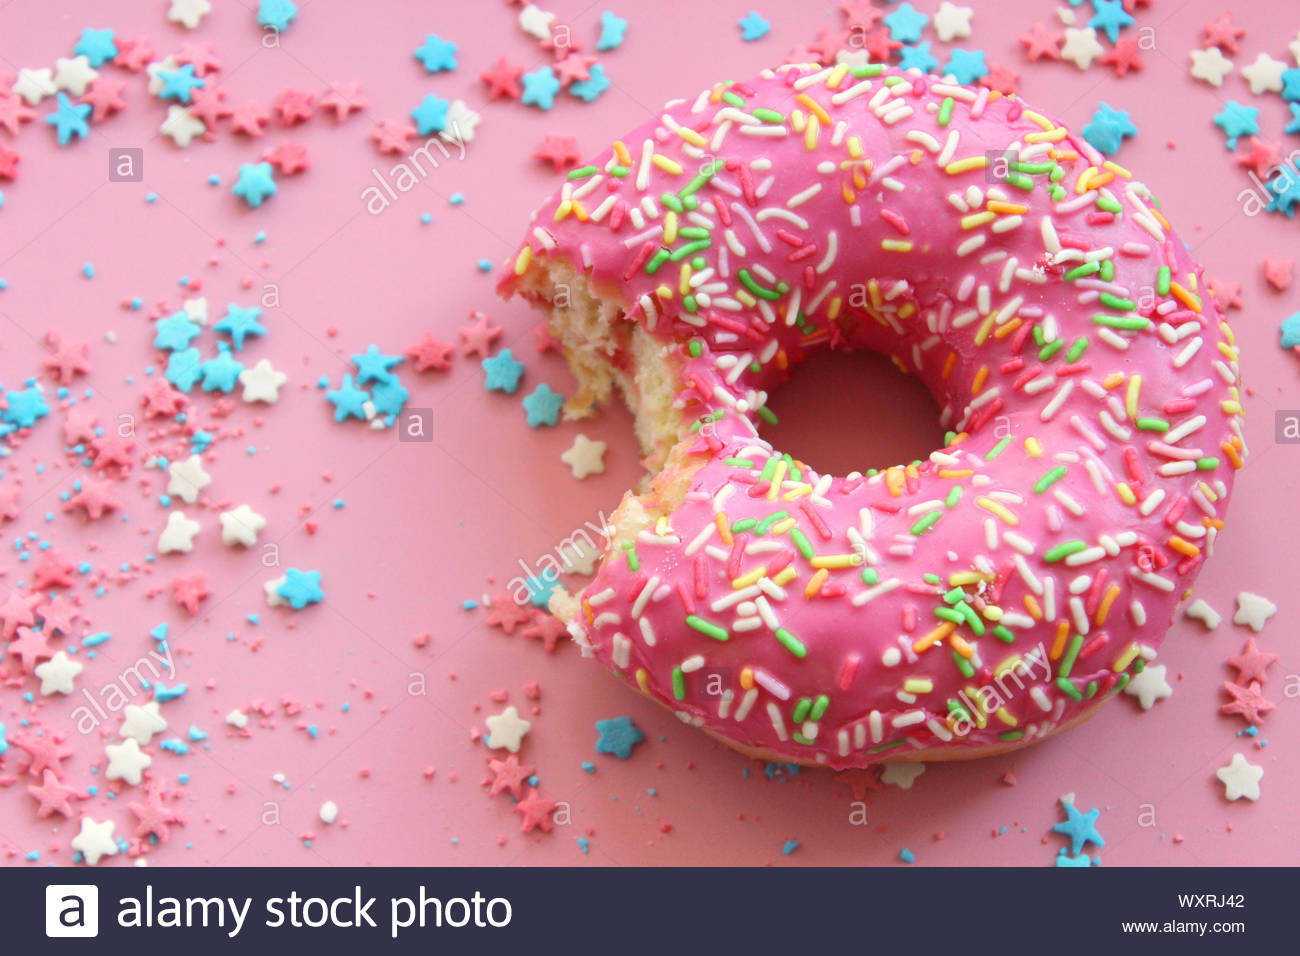 Pink Donut Surrounded By Sugar Filling For Cake Frame On